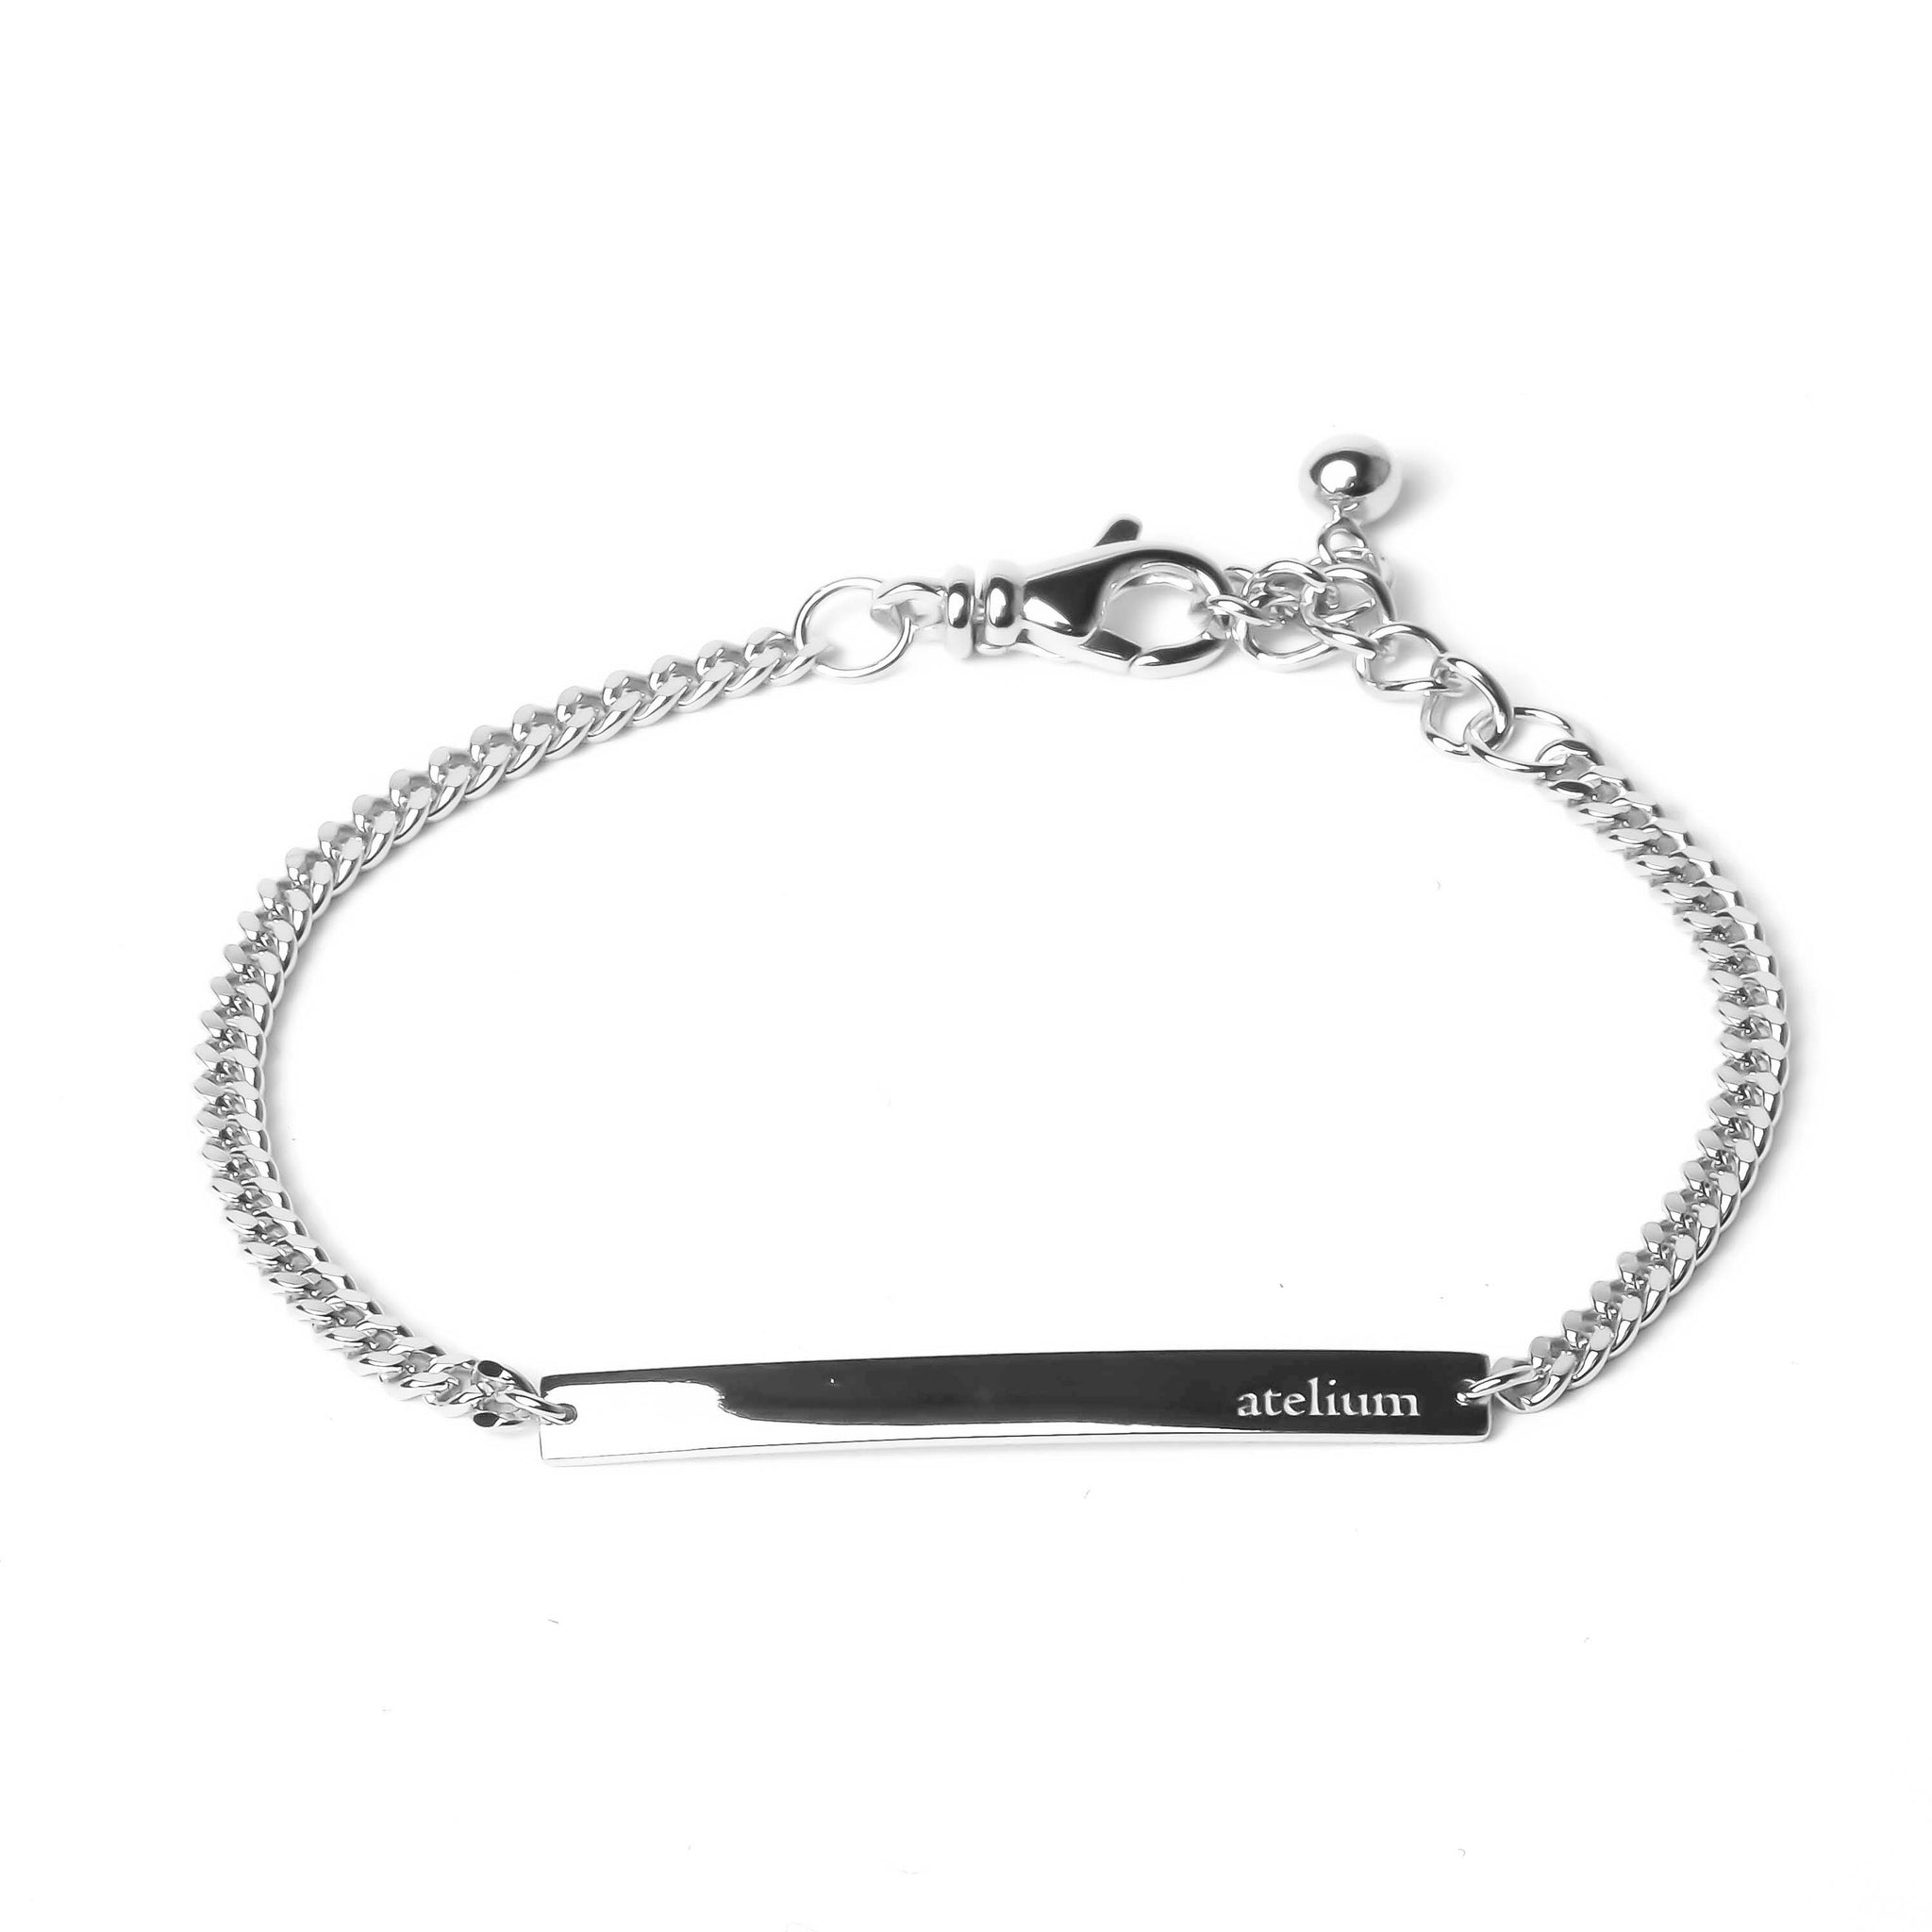 Silver chain bracelet with silver bar in the middle with atelium engraved on it 